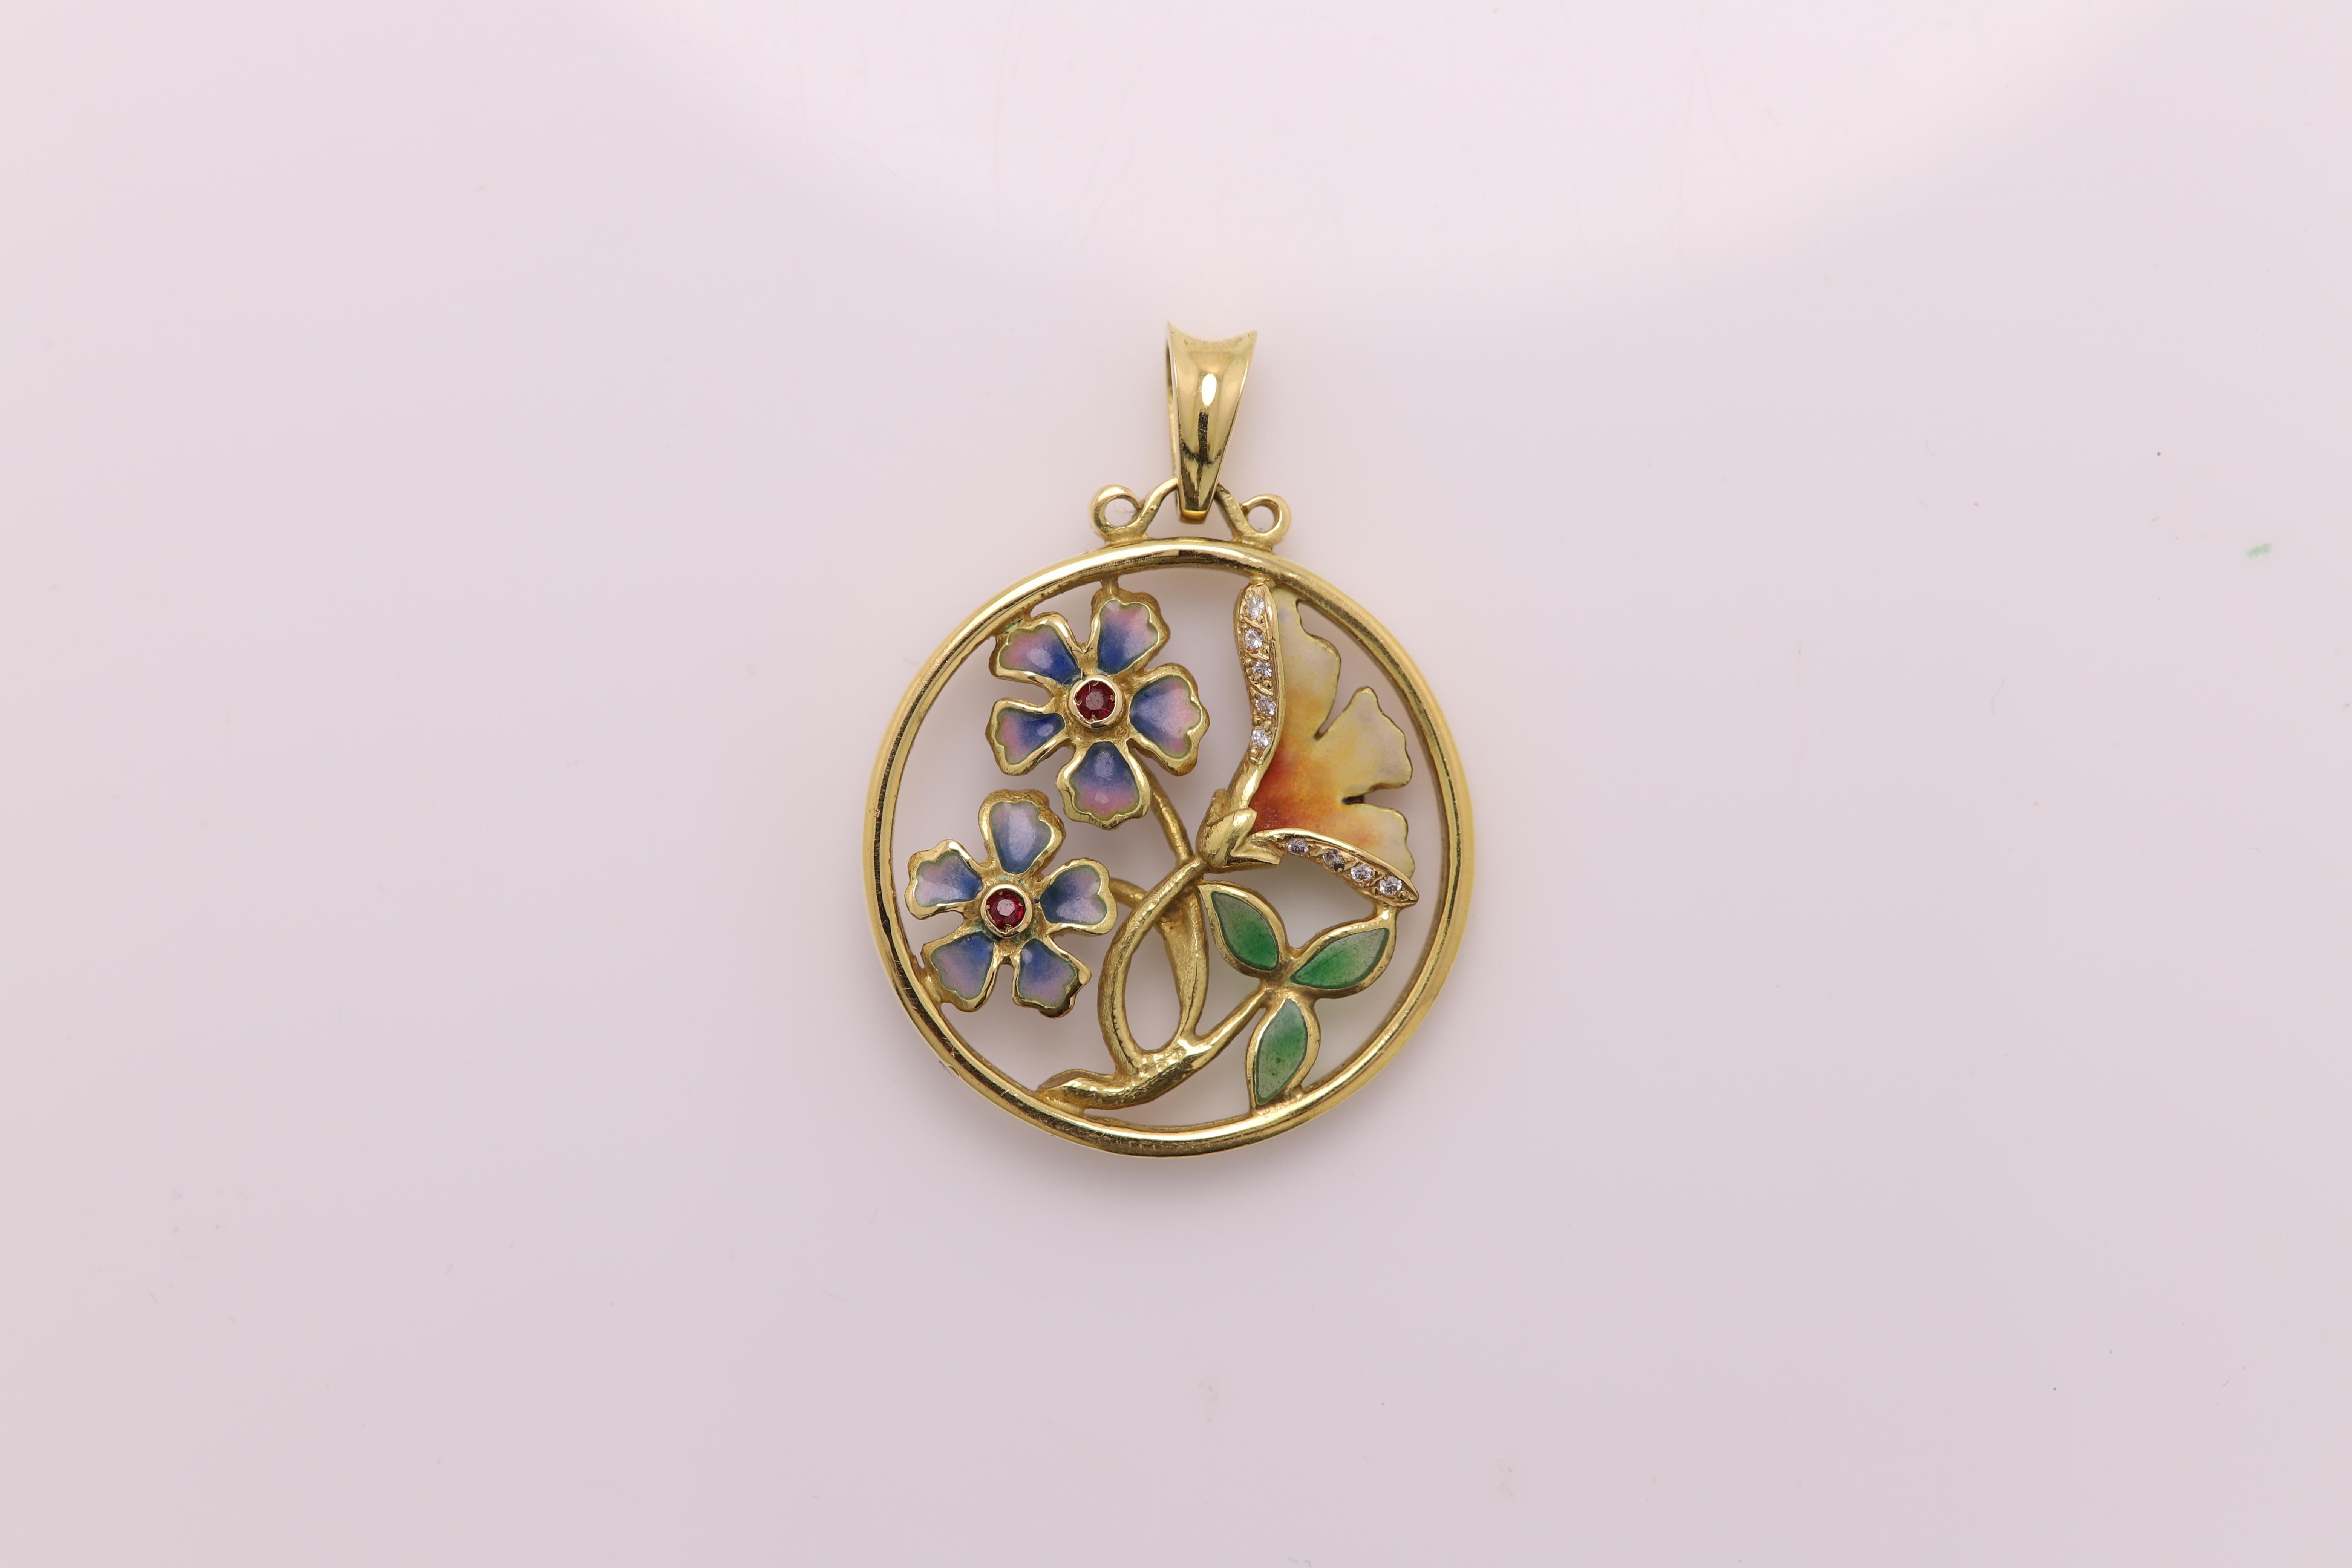 Vintage Enamel Pendant Hand made in Spain  
18K Yellow Gold 
approx size 1'  inch (25mm)
has few Diamond and two Ruby Gemstone (all natural)
Weight 10.6 grams
Style is based on the period of Nouveau era
made approx. 20+ years ago
Overall great